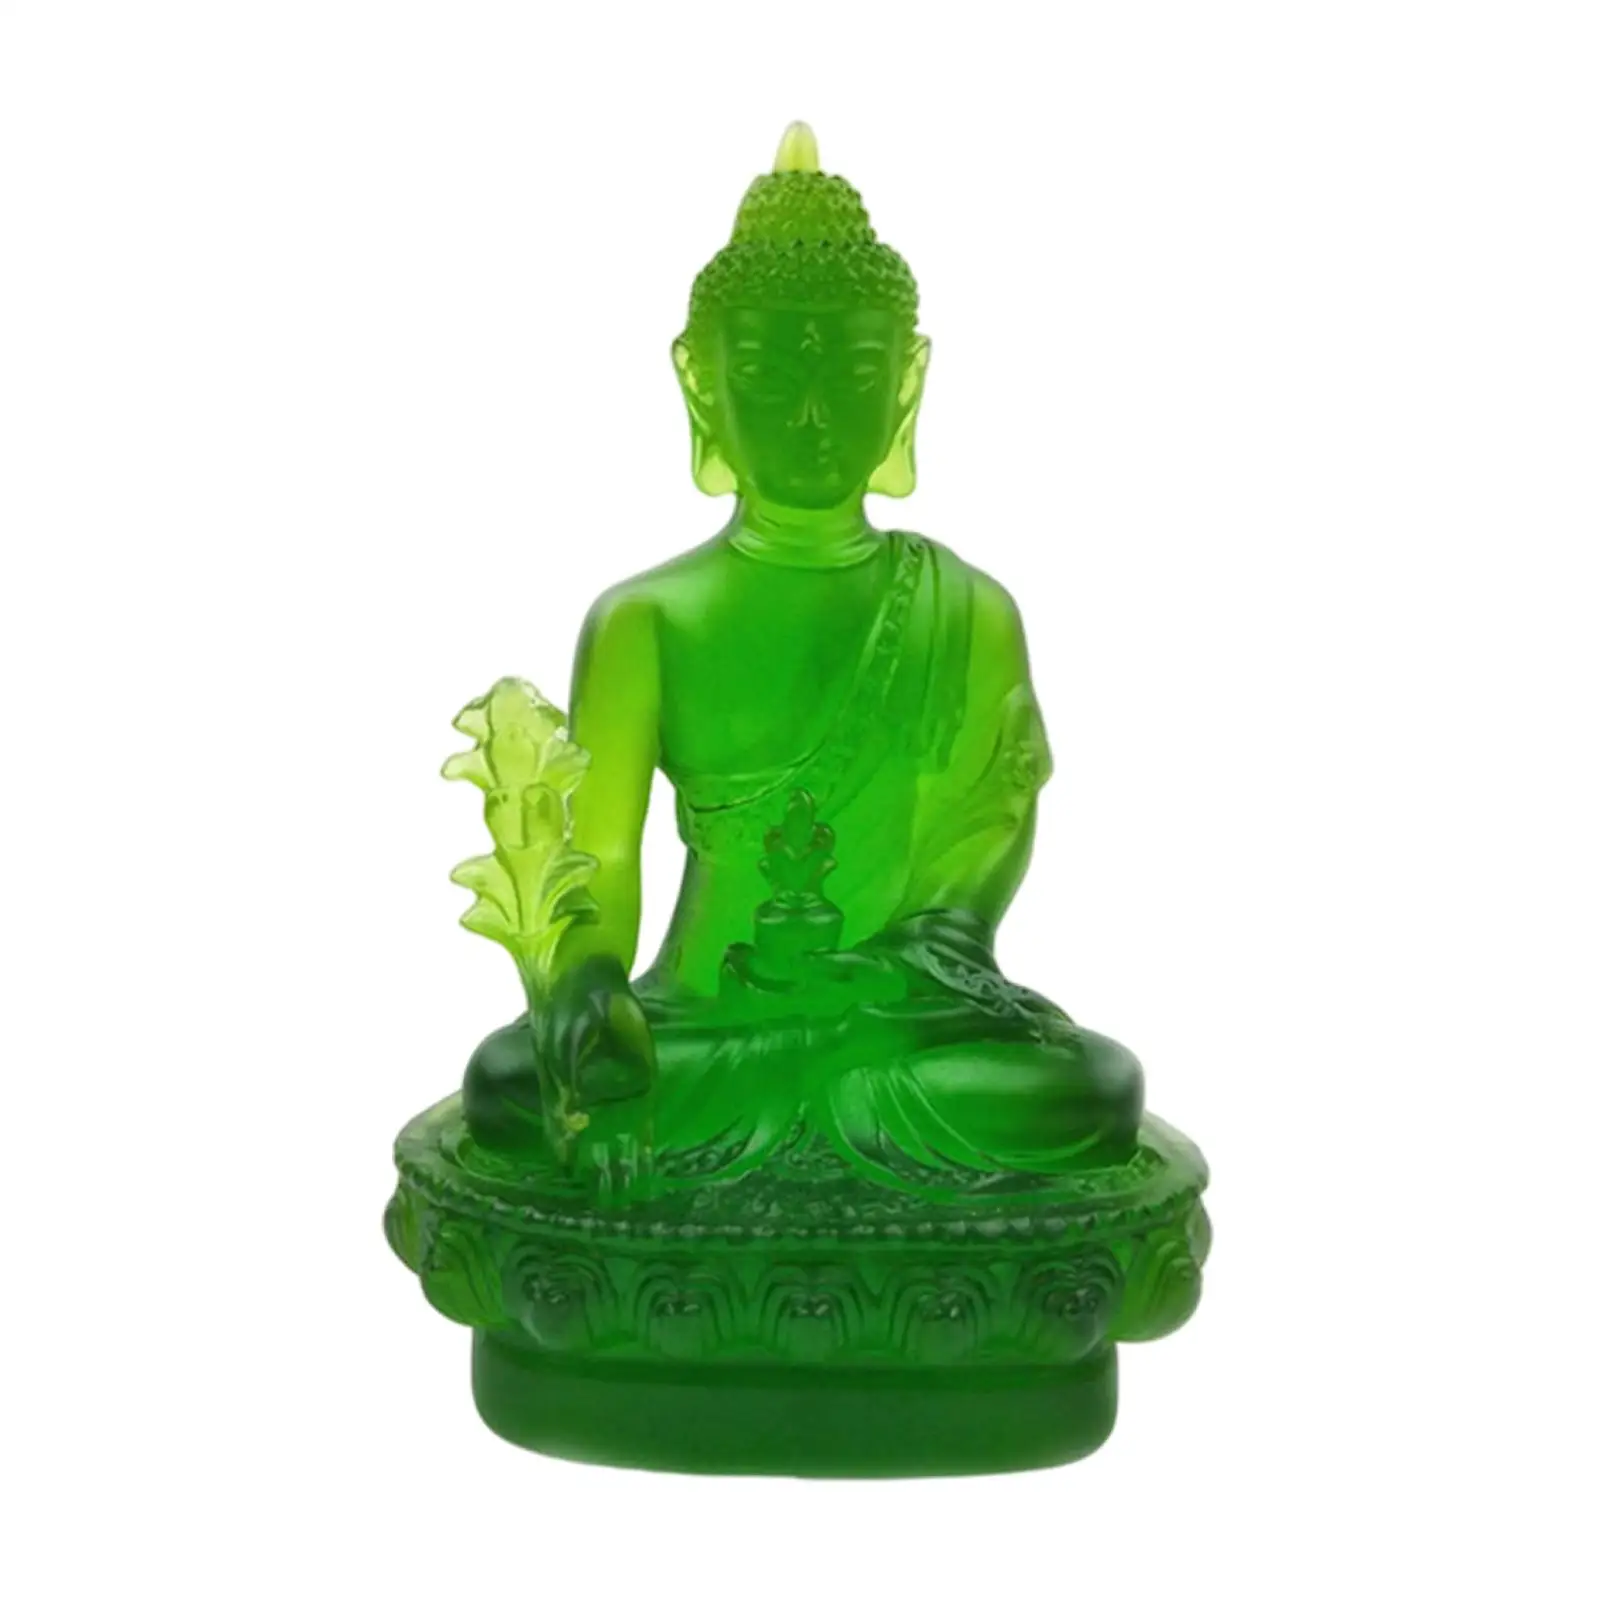 Meditation Buddha Statue Pharmacist Sculpture Enshrined Decorations Figurines Collection for Meditation Living Room Office Home